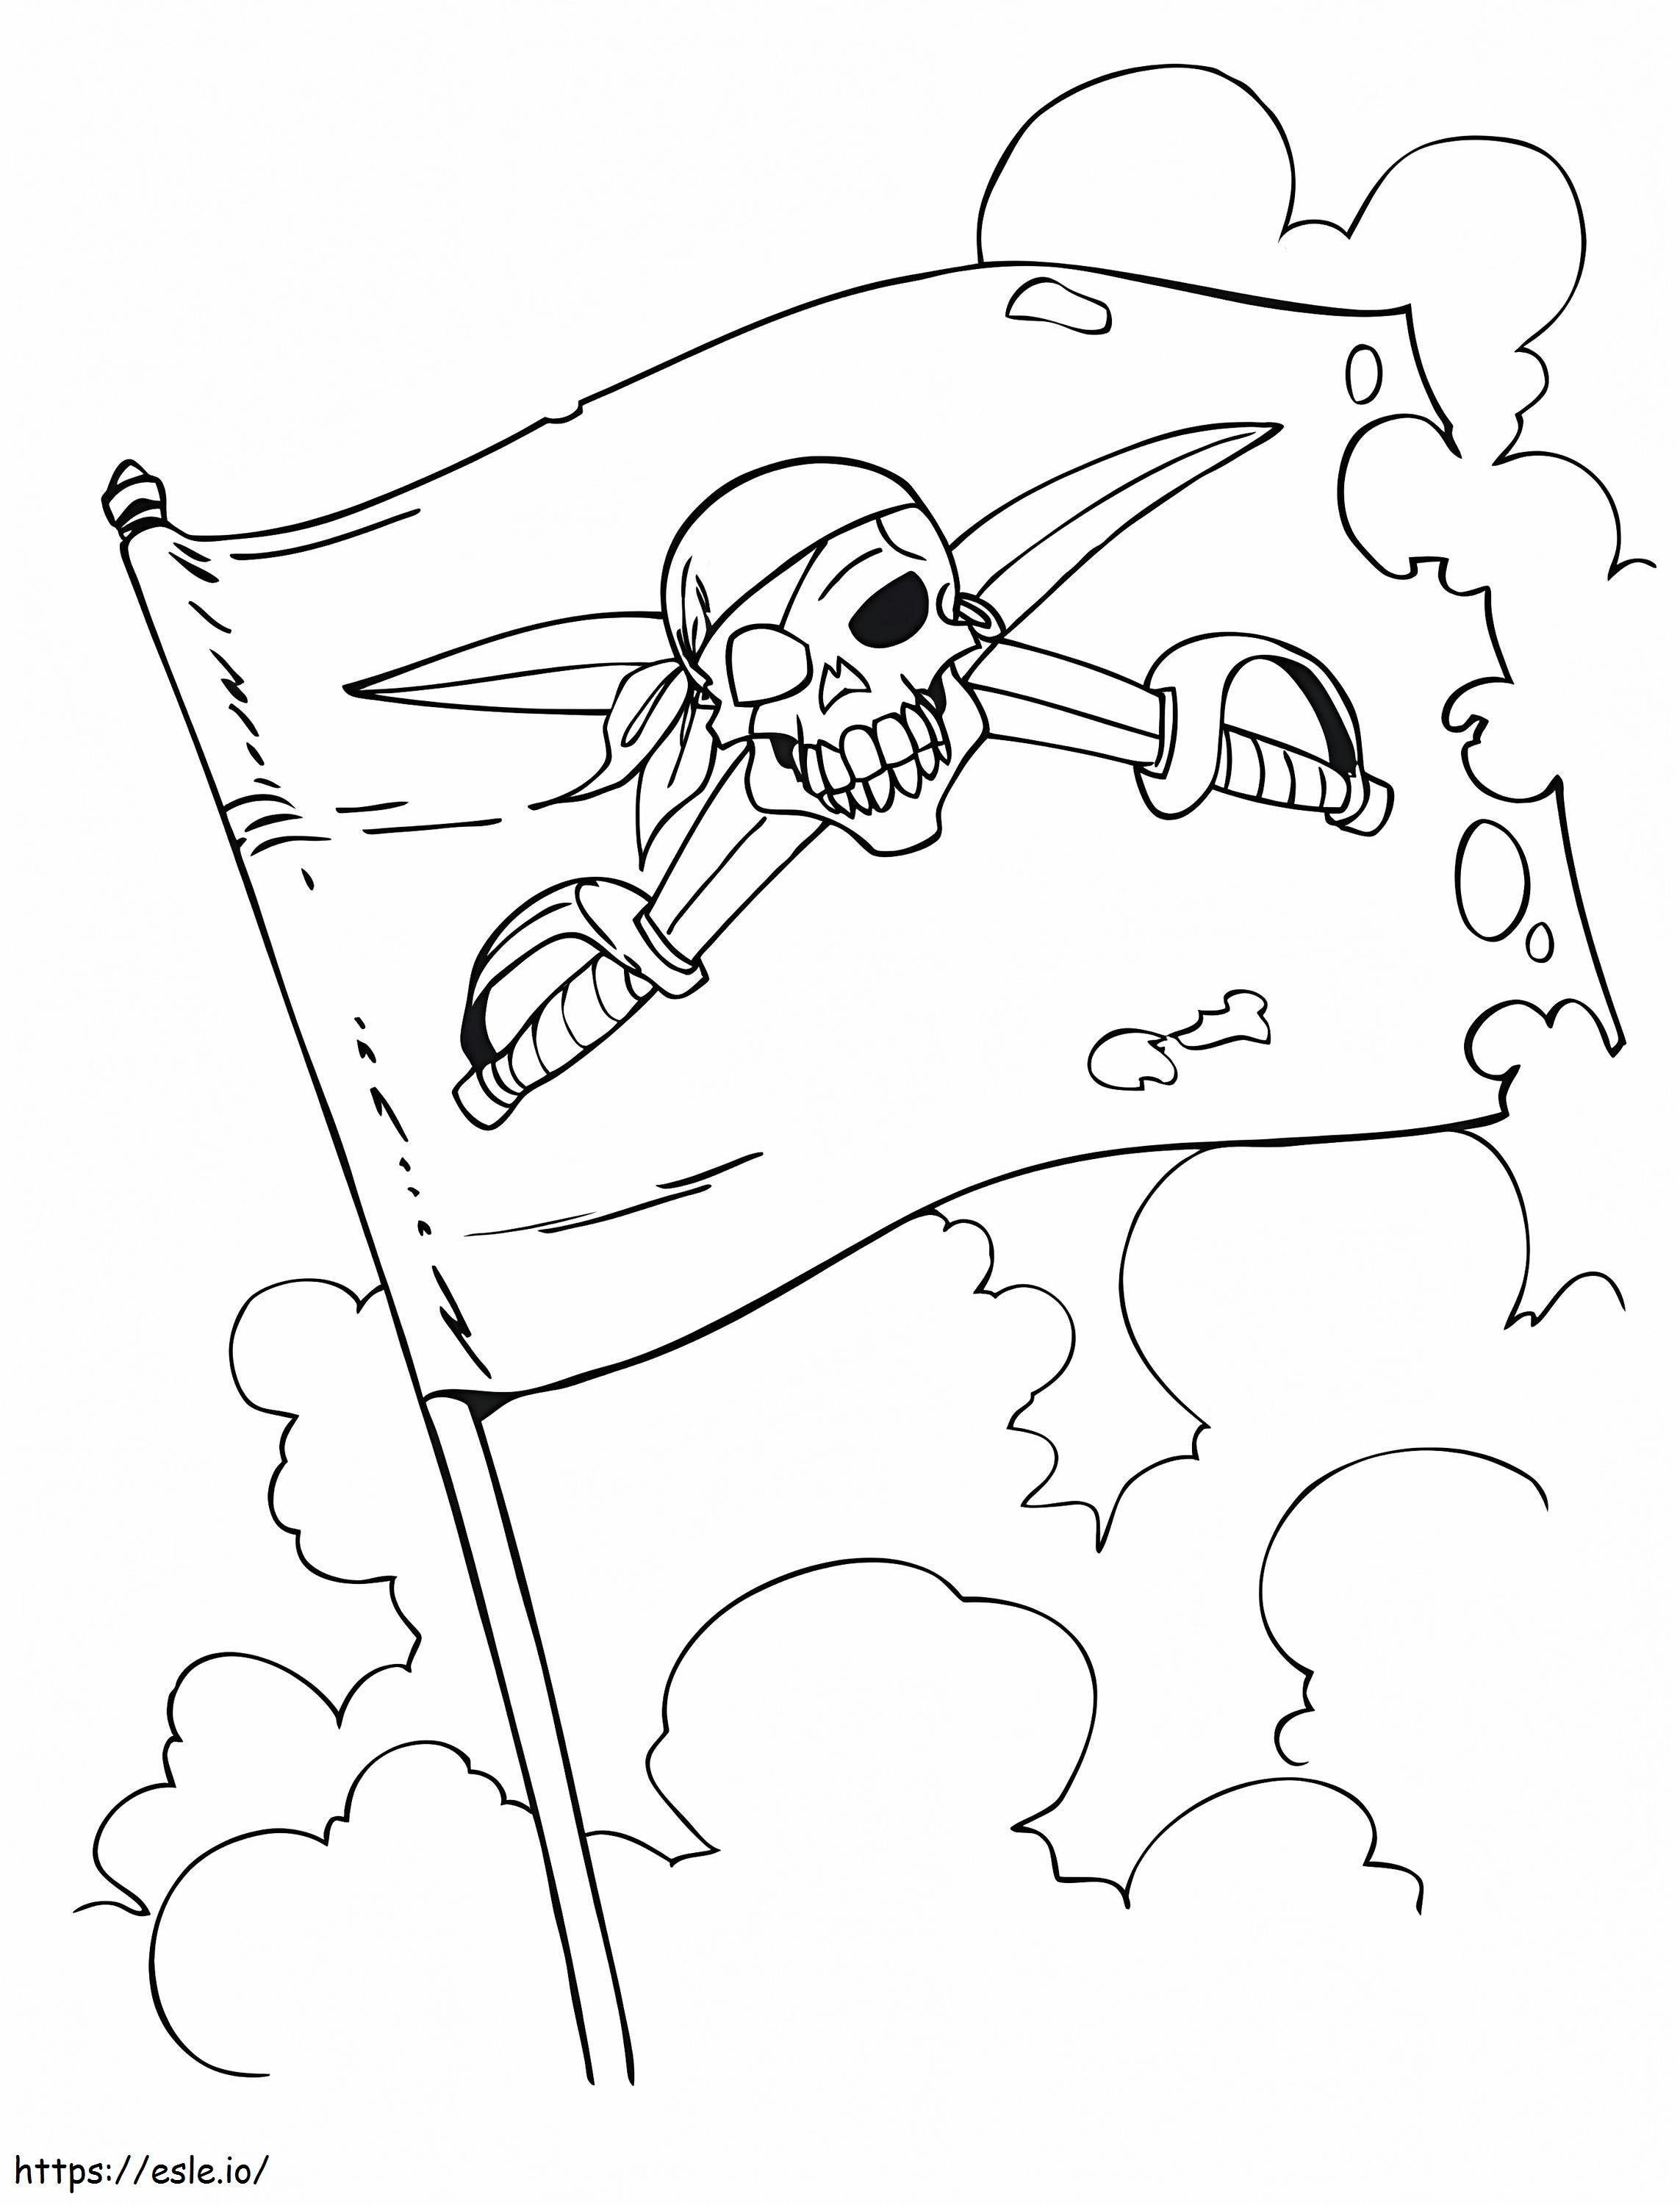 A Pirate Flag coloring page